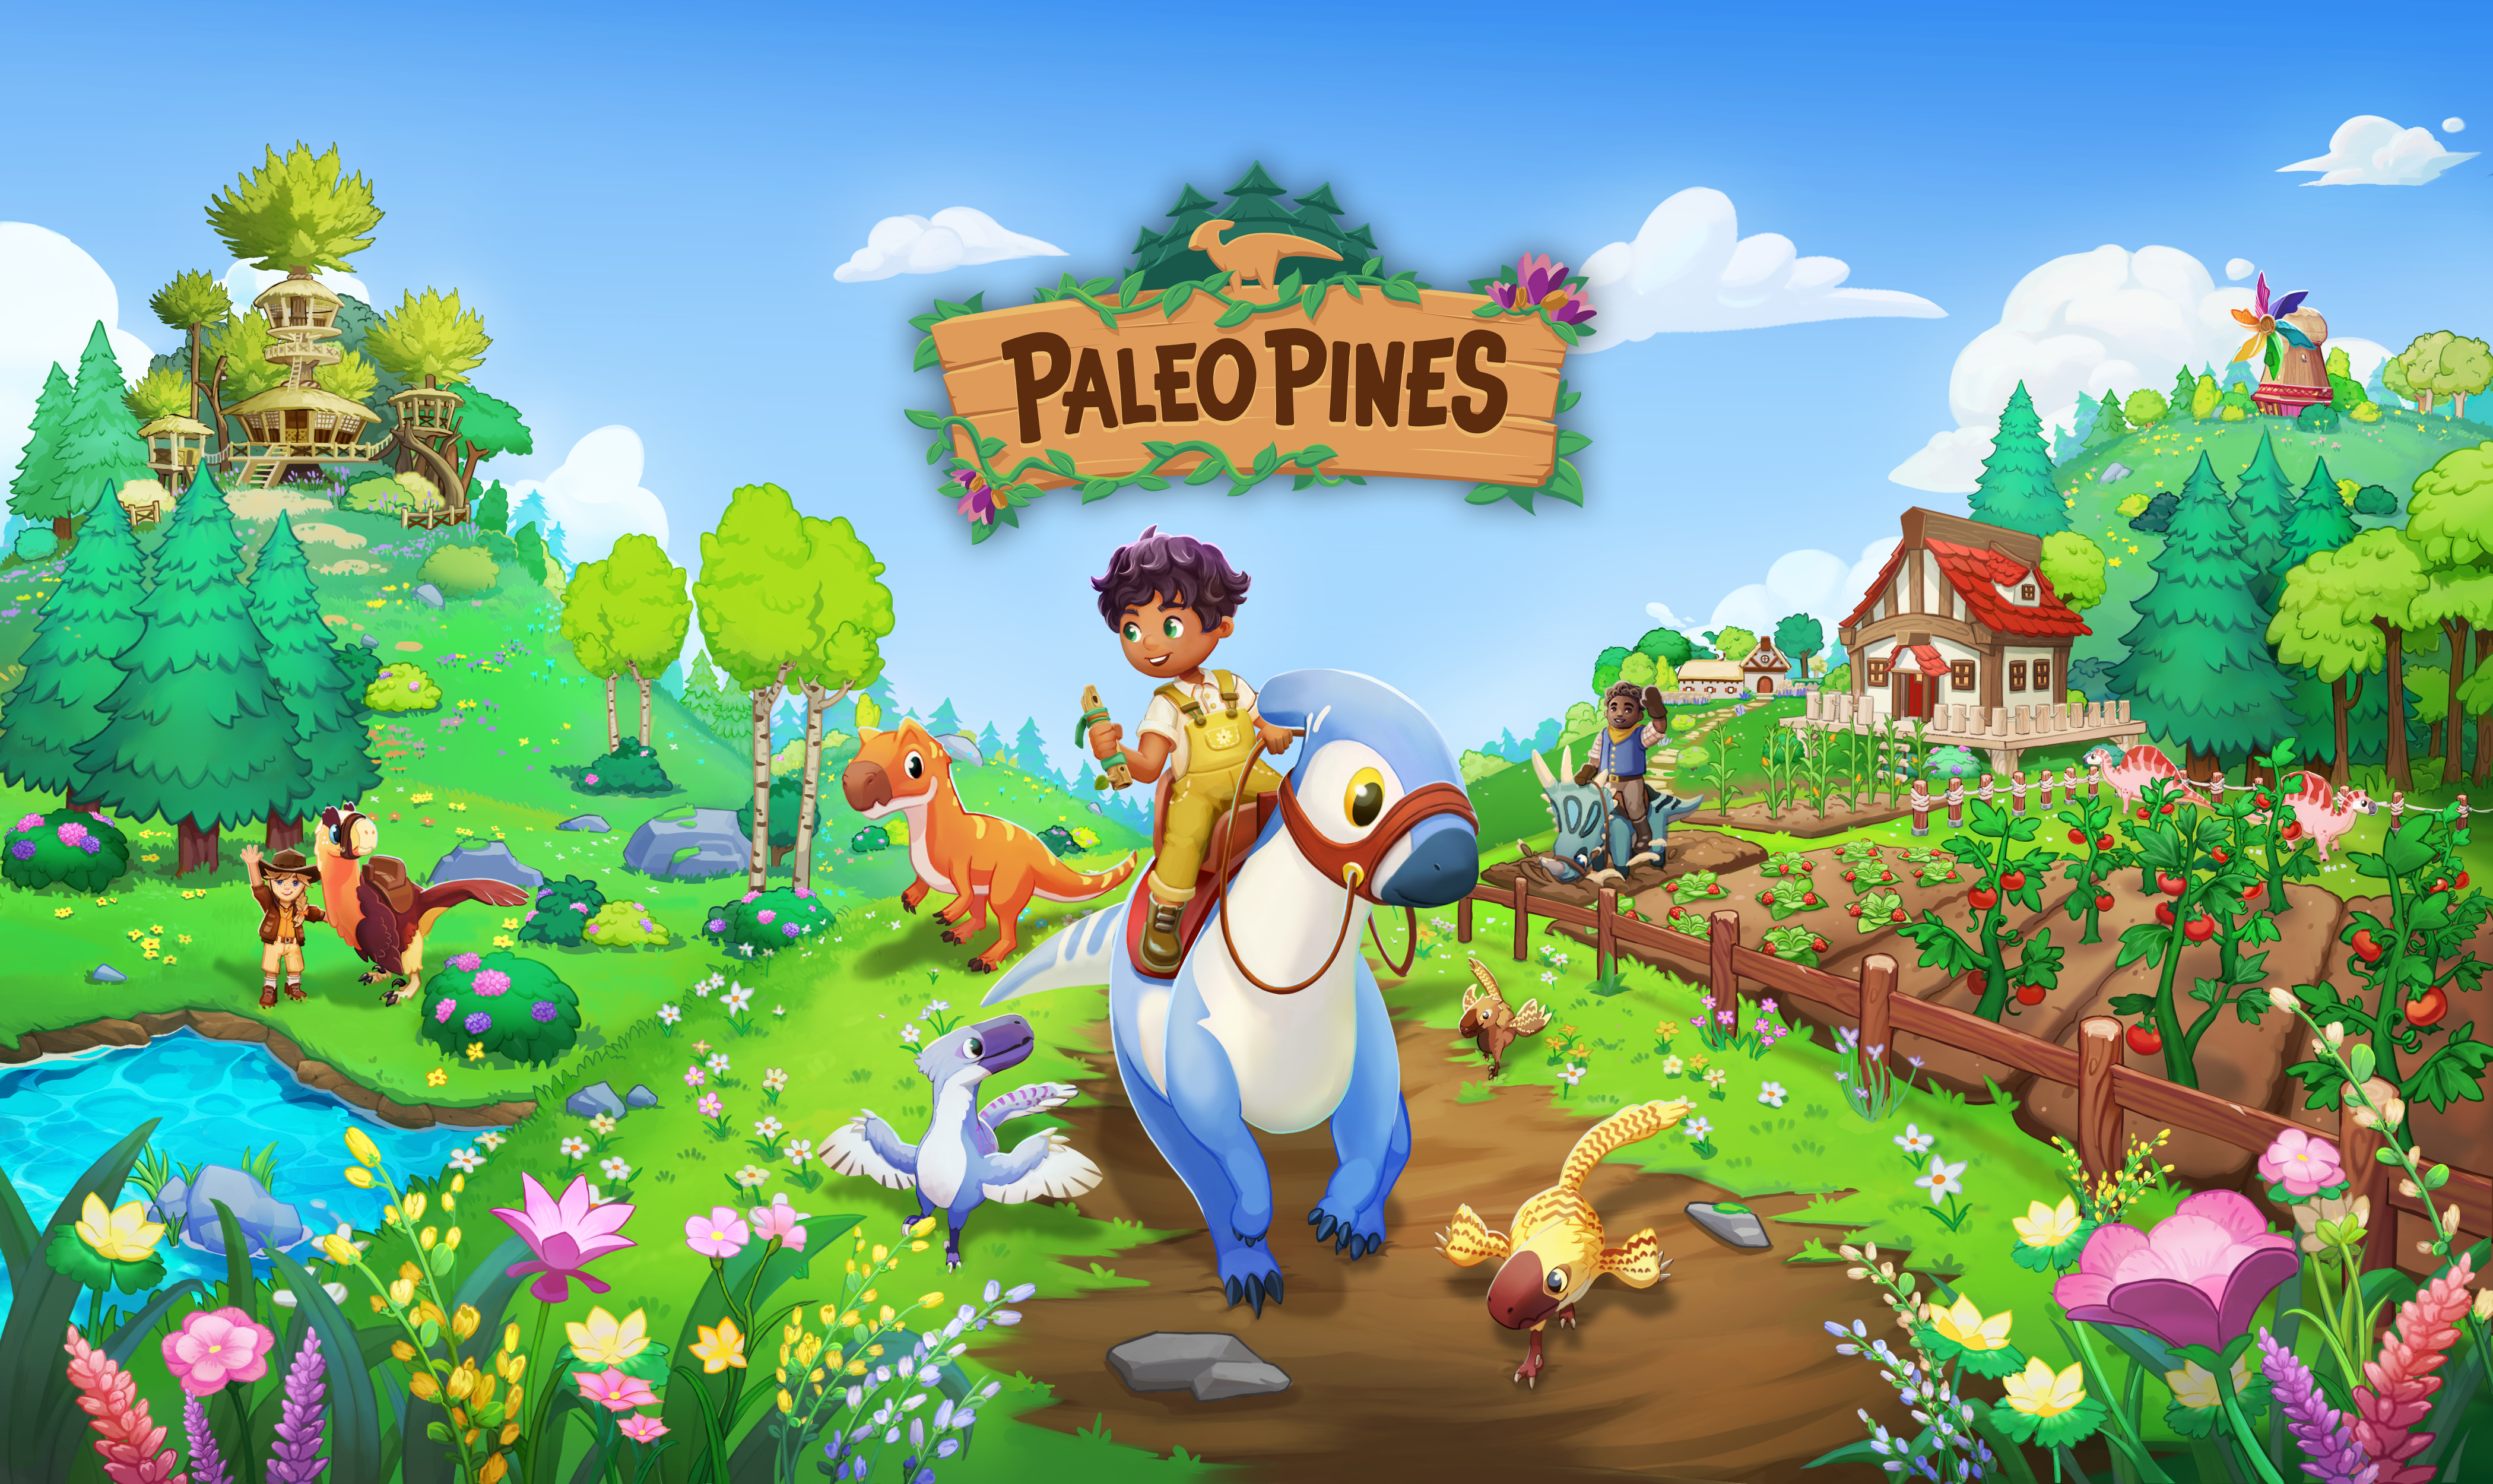 Play the Paleo Pines demo during Steam Next Fest